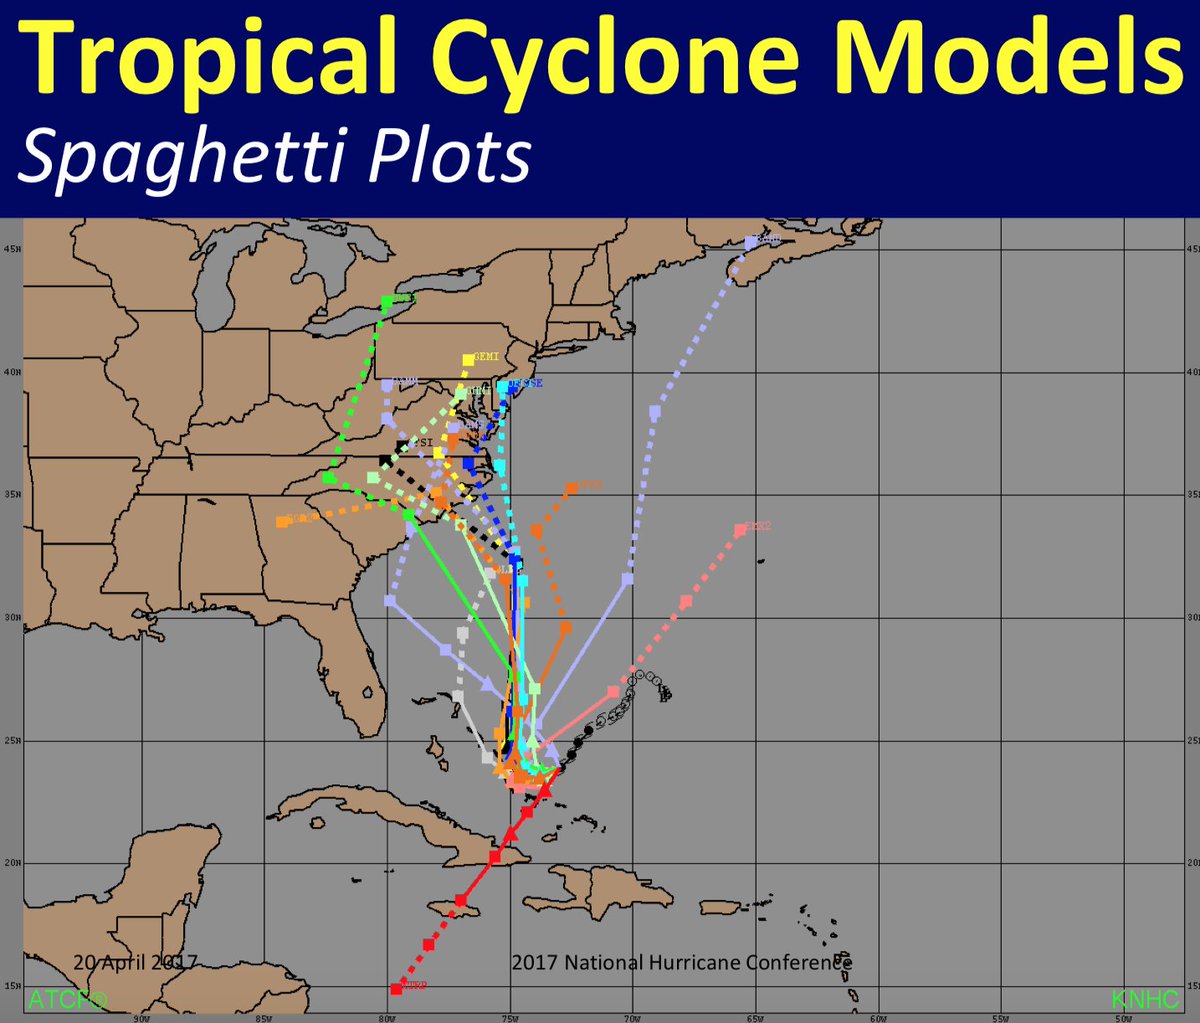 We blended results from three different models developed by three different teams. The paradigm is that of the “spaghetti plots” with which those in the Southeastern United States are likely familiar – assessing the spread of various models to look for consensus.